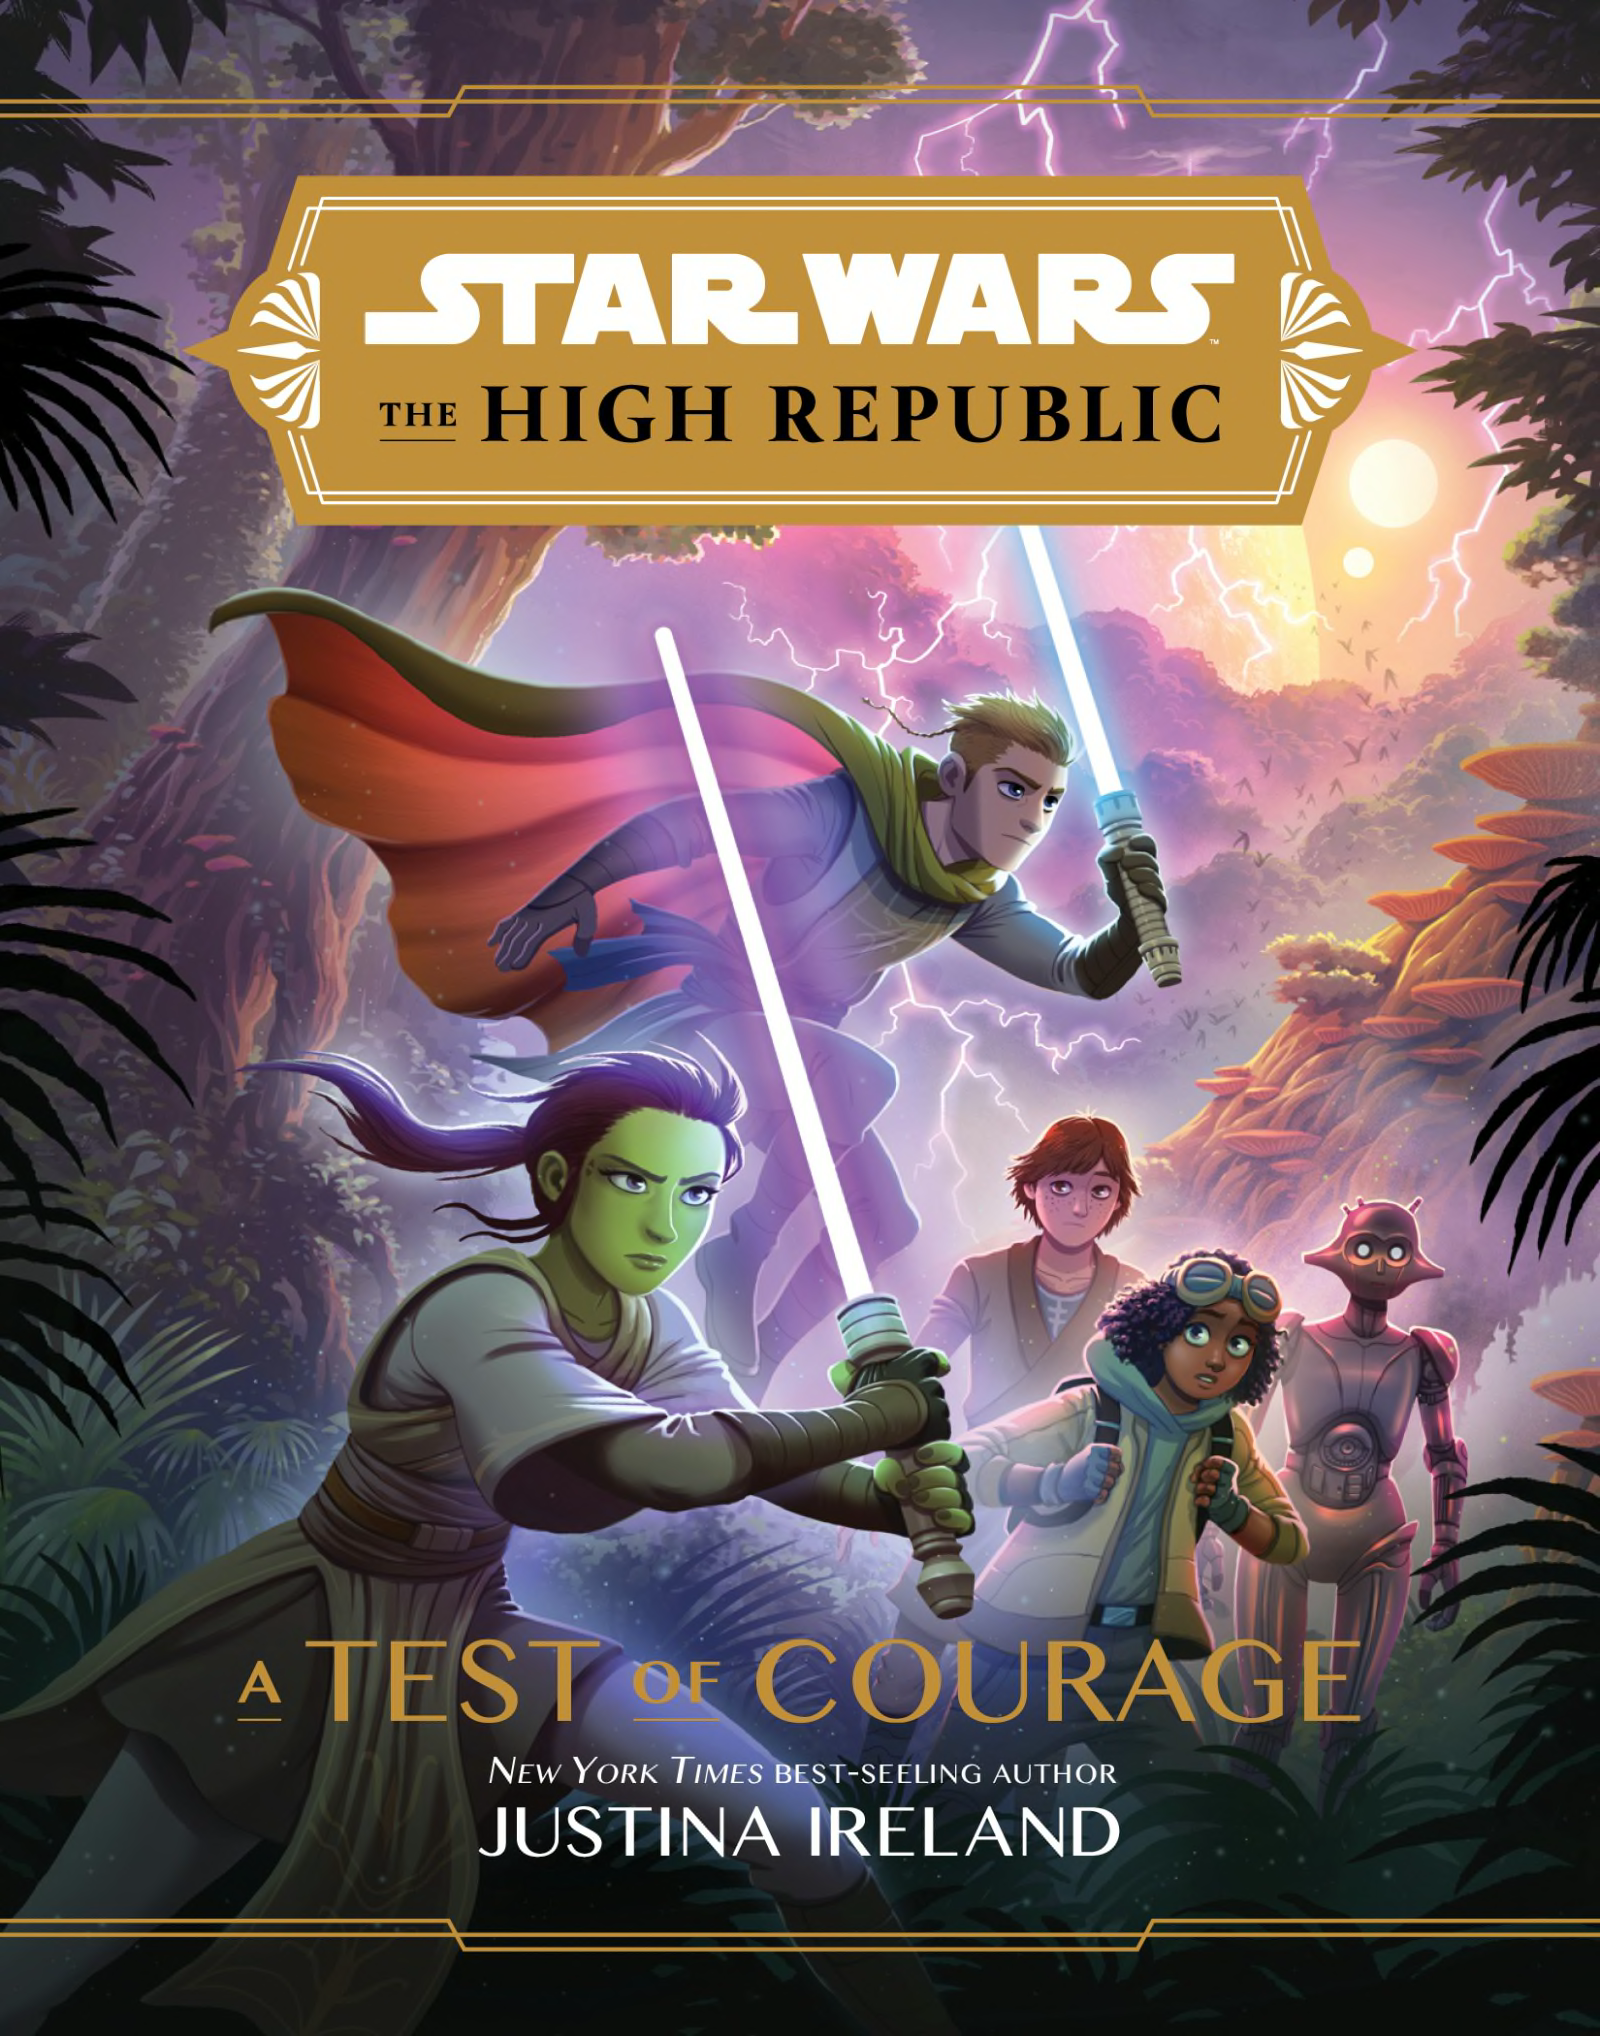 New Star Wars books revealed Enter The High Republic